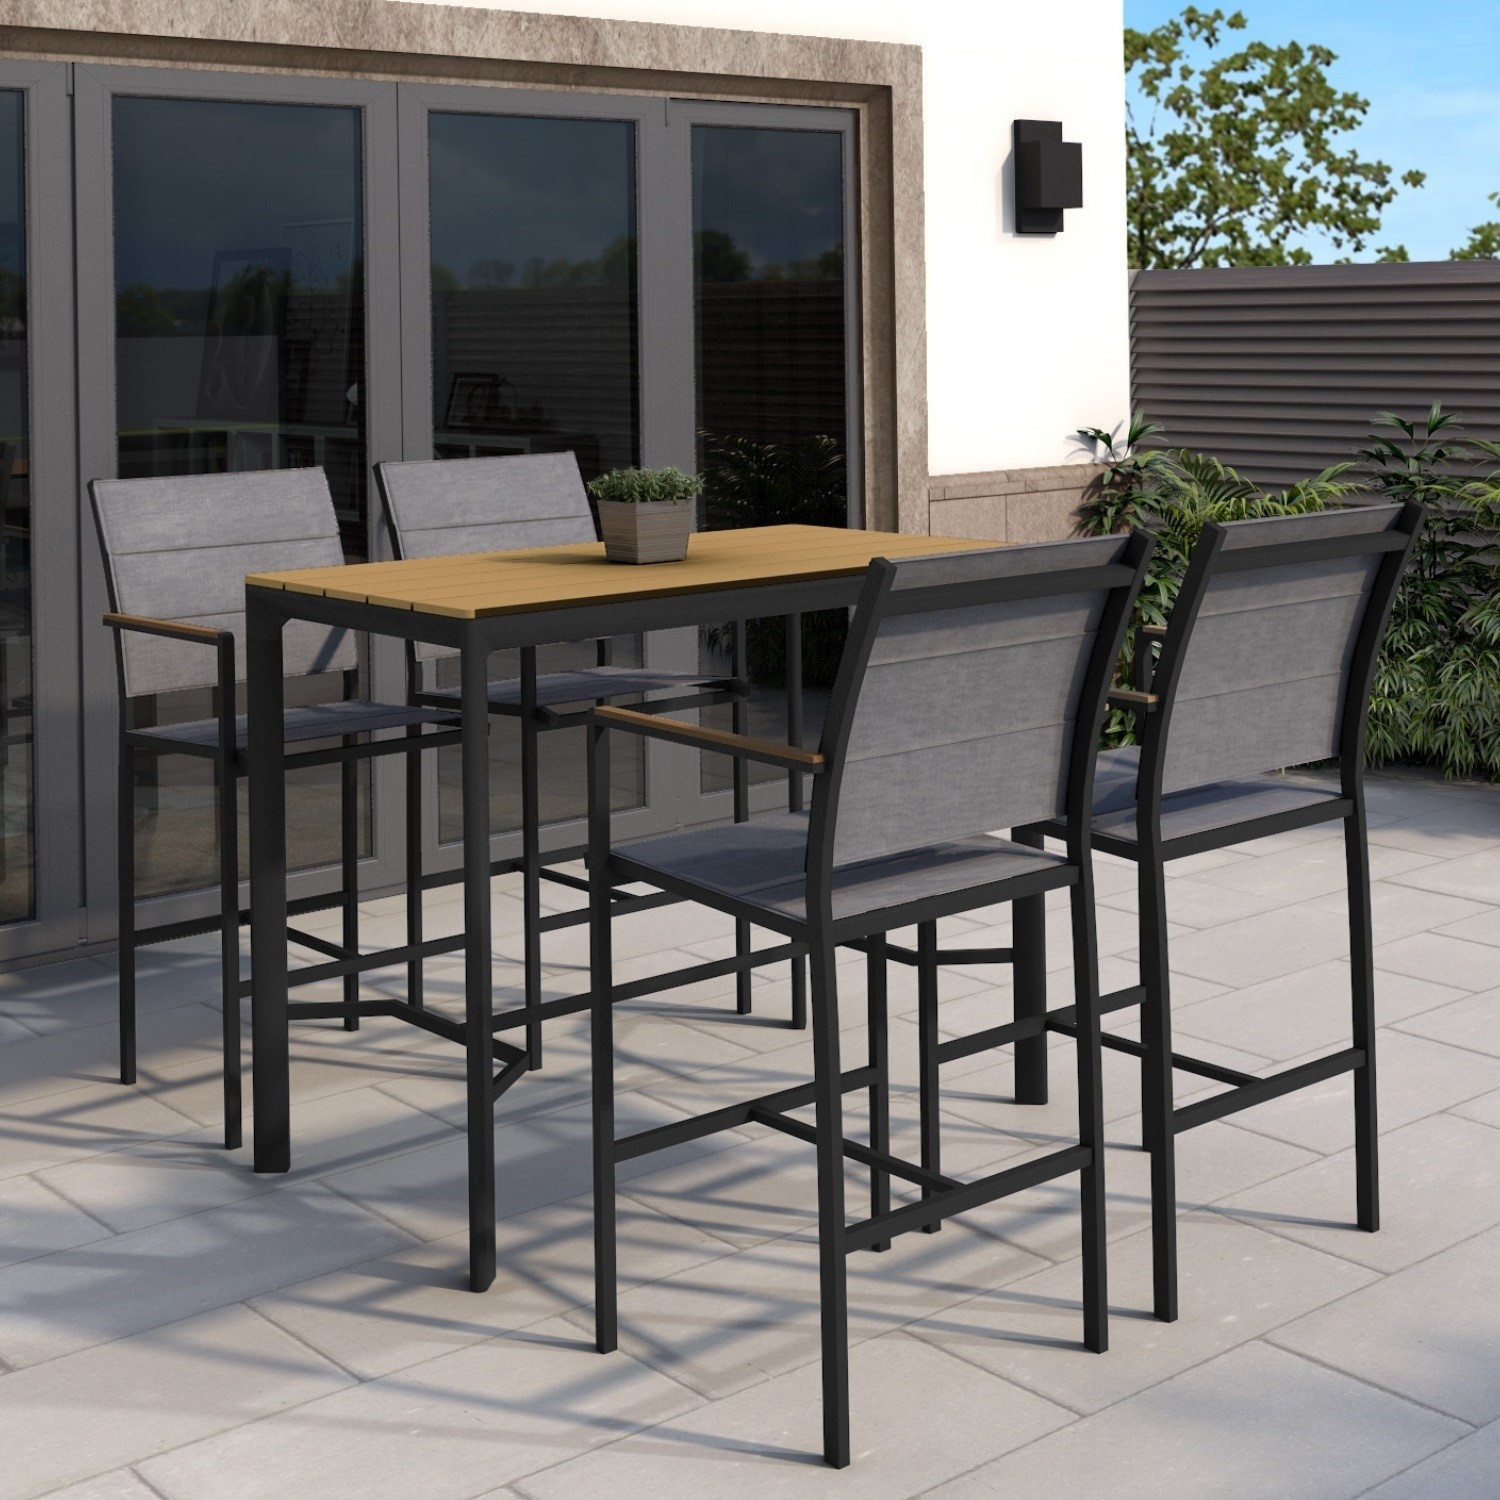 Black Outdoor Bar Set With 4 Stools, Outdoor High Bar Stool And Table Set